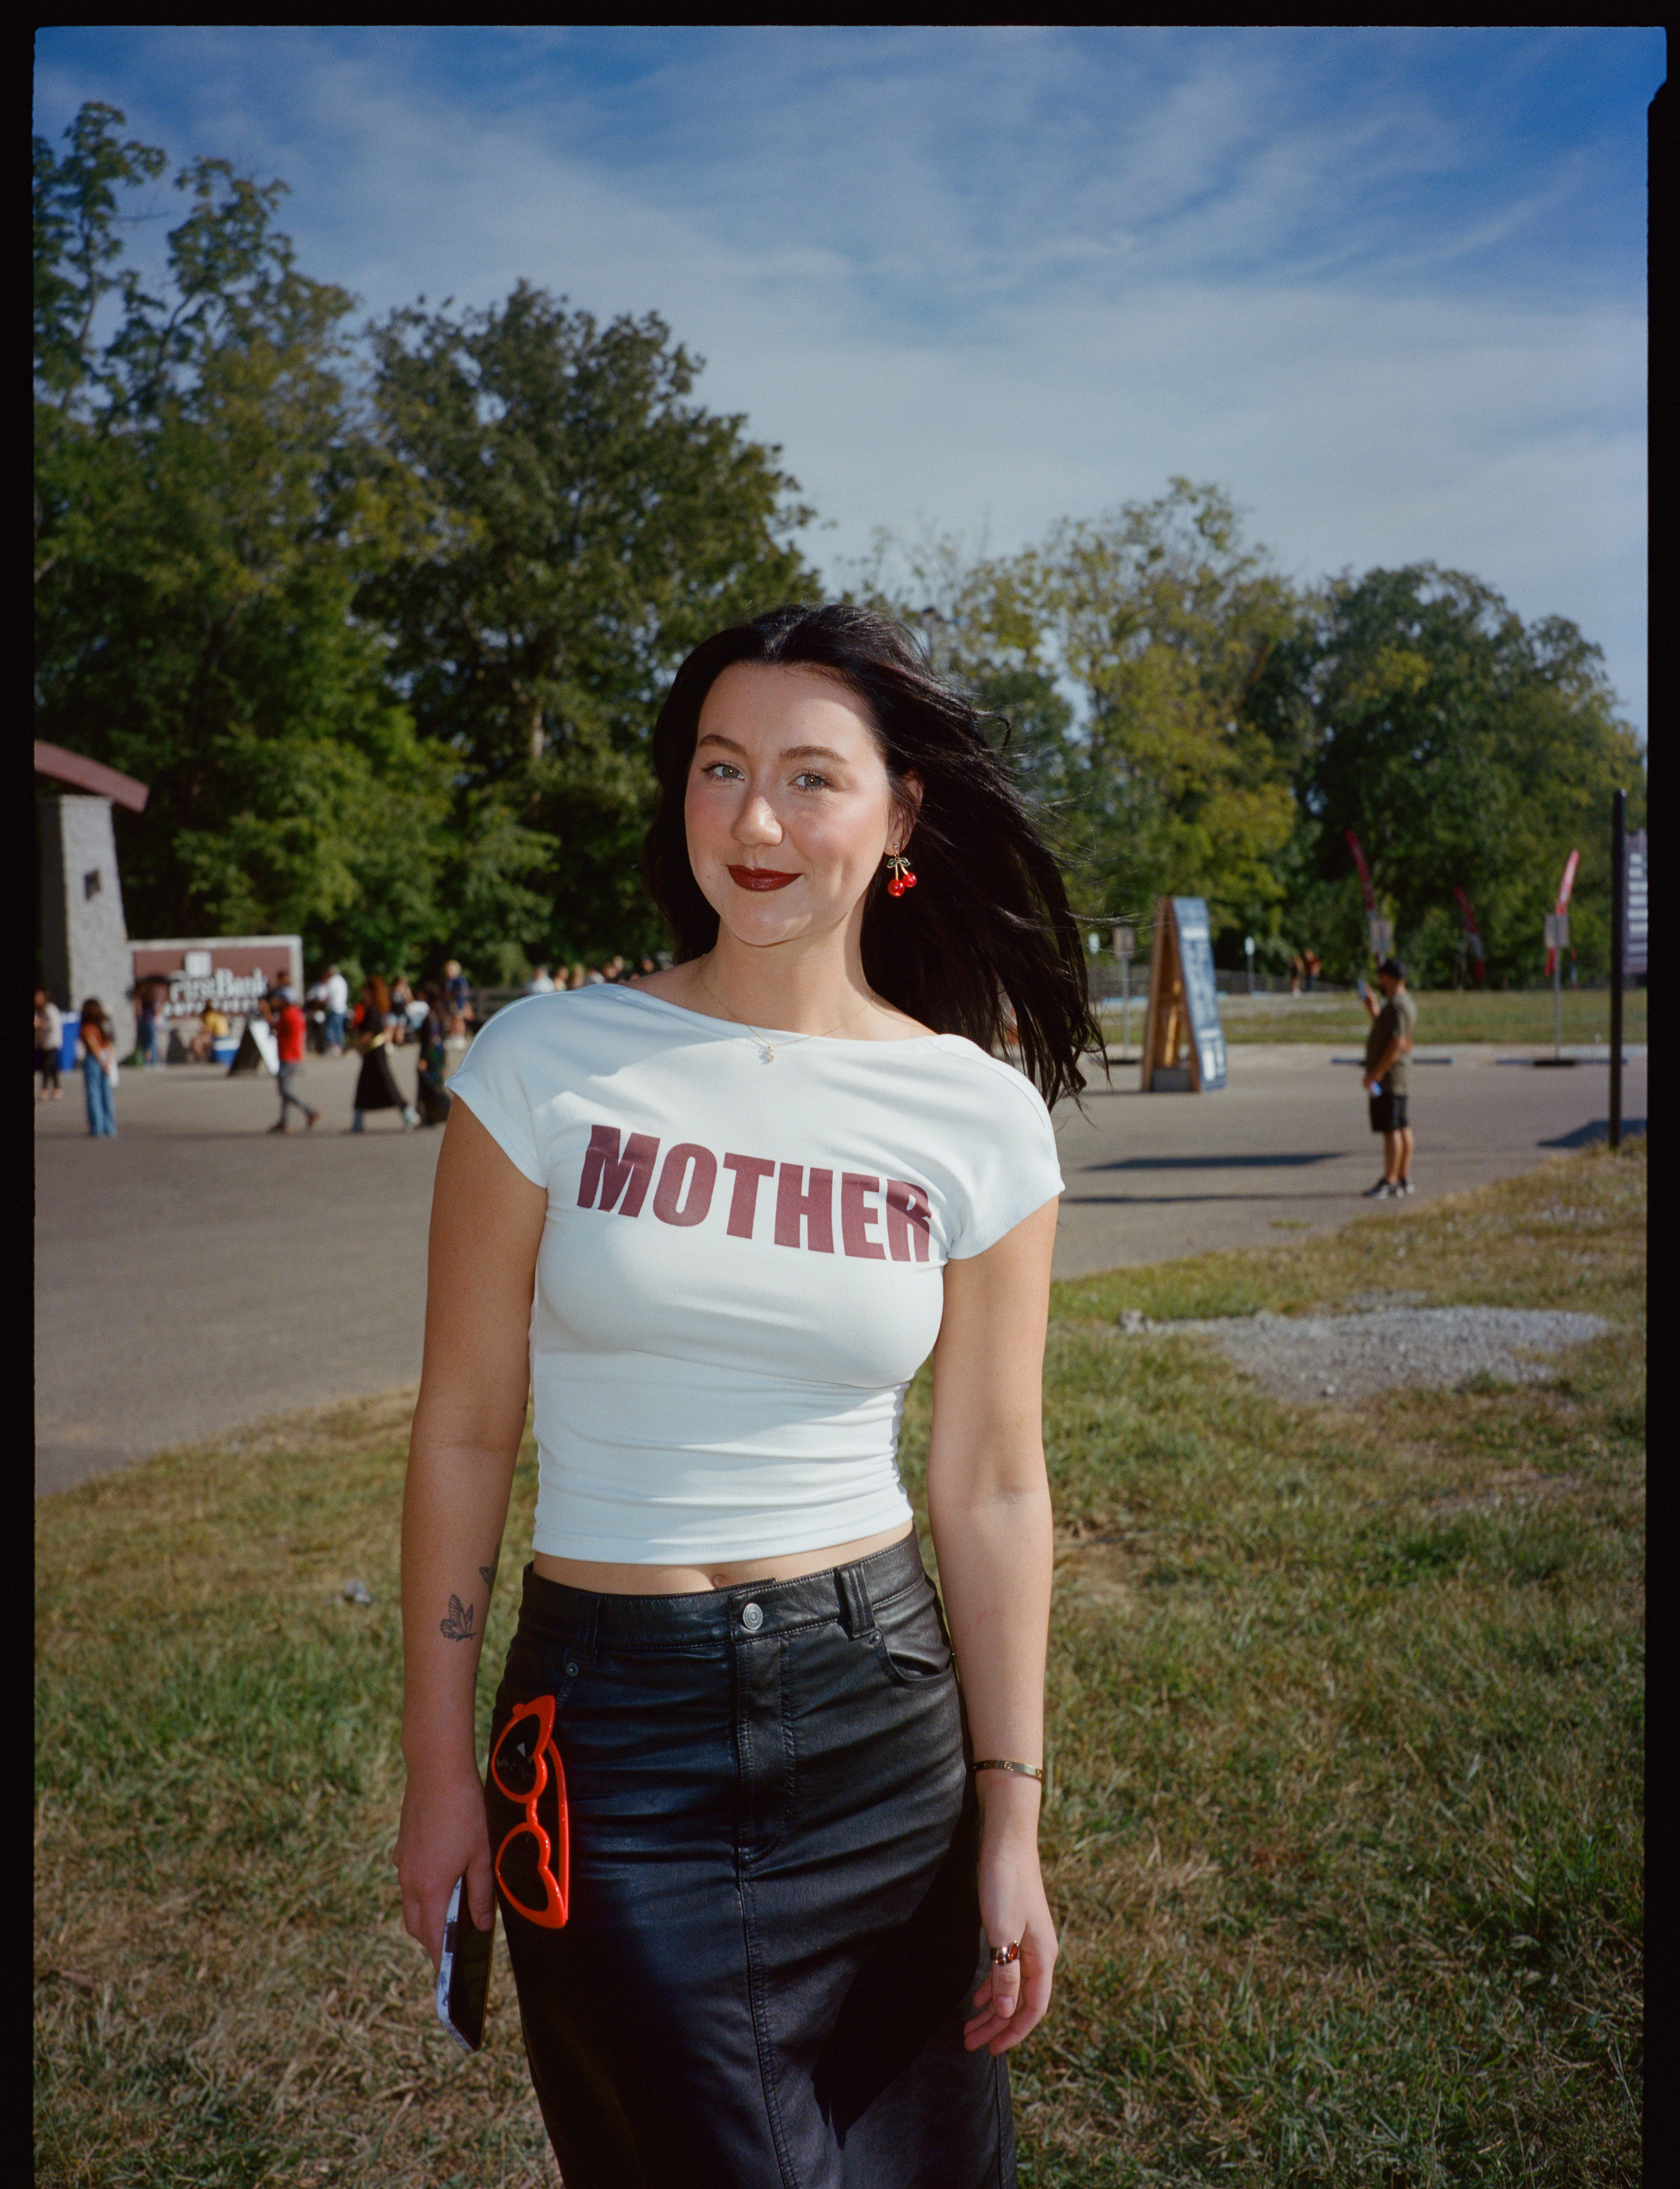 a lana del rey fan stands outside one of her shows, she is wearing a t-shirt that says 'mother' in red writing and a black leather skirt.